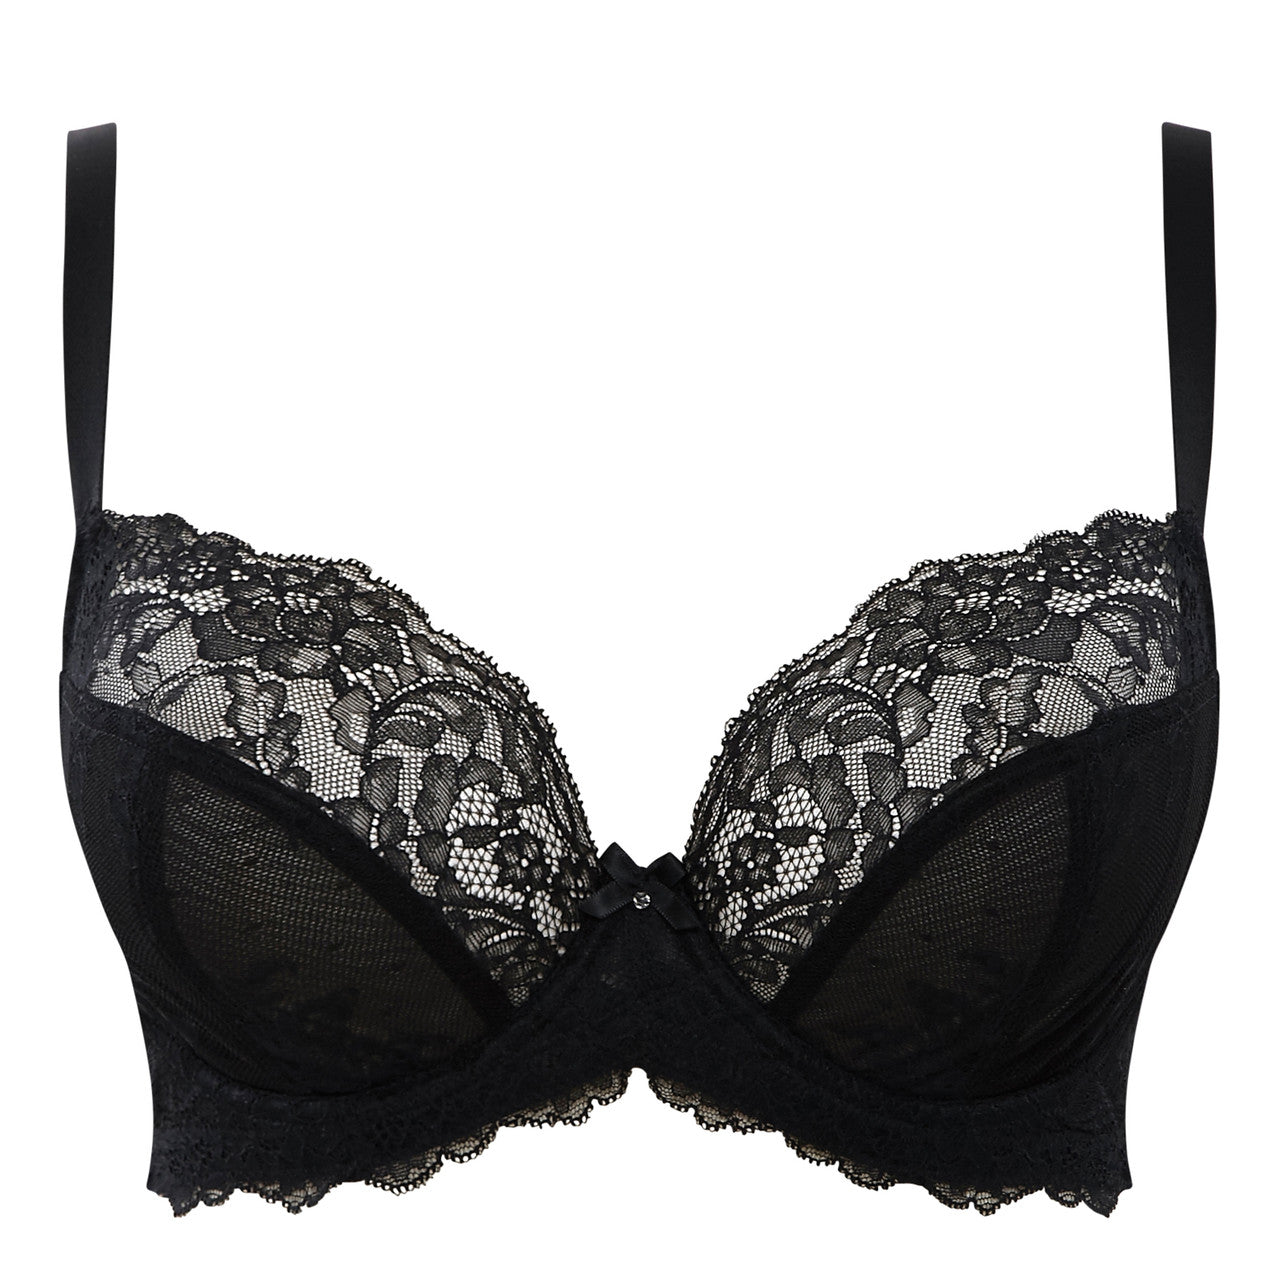 Ana Non-Padded Plunge Bra in black, front view, product shot.